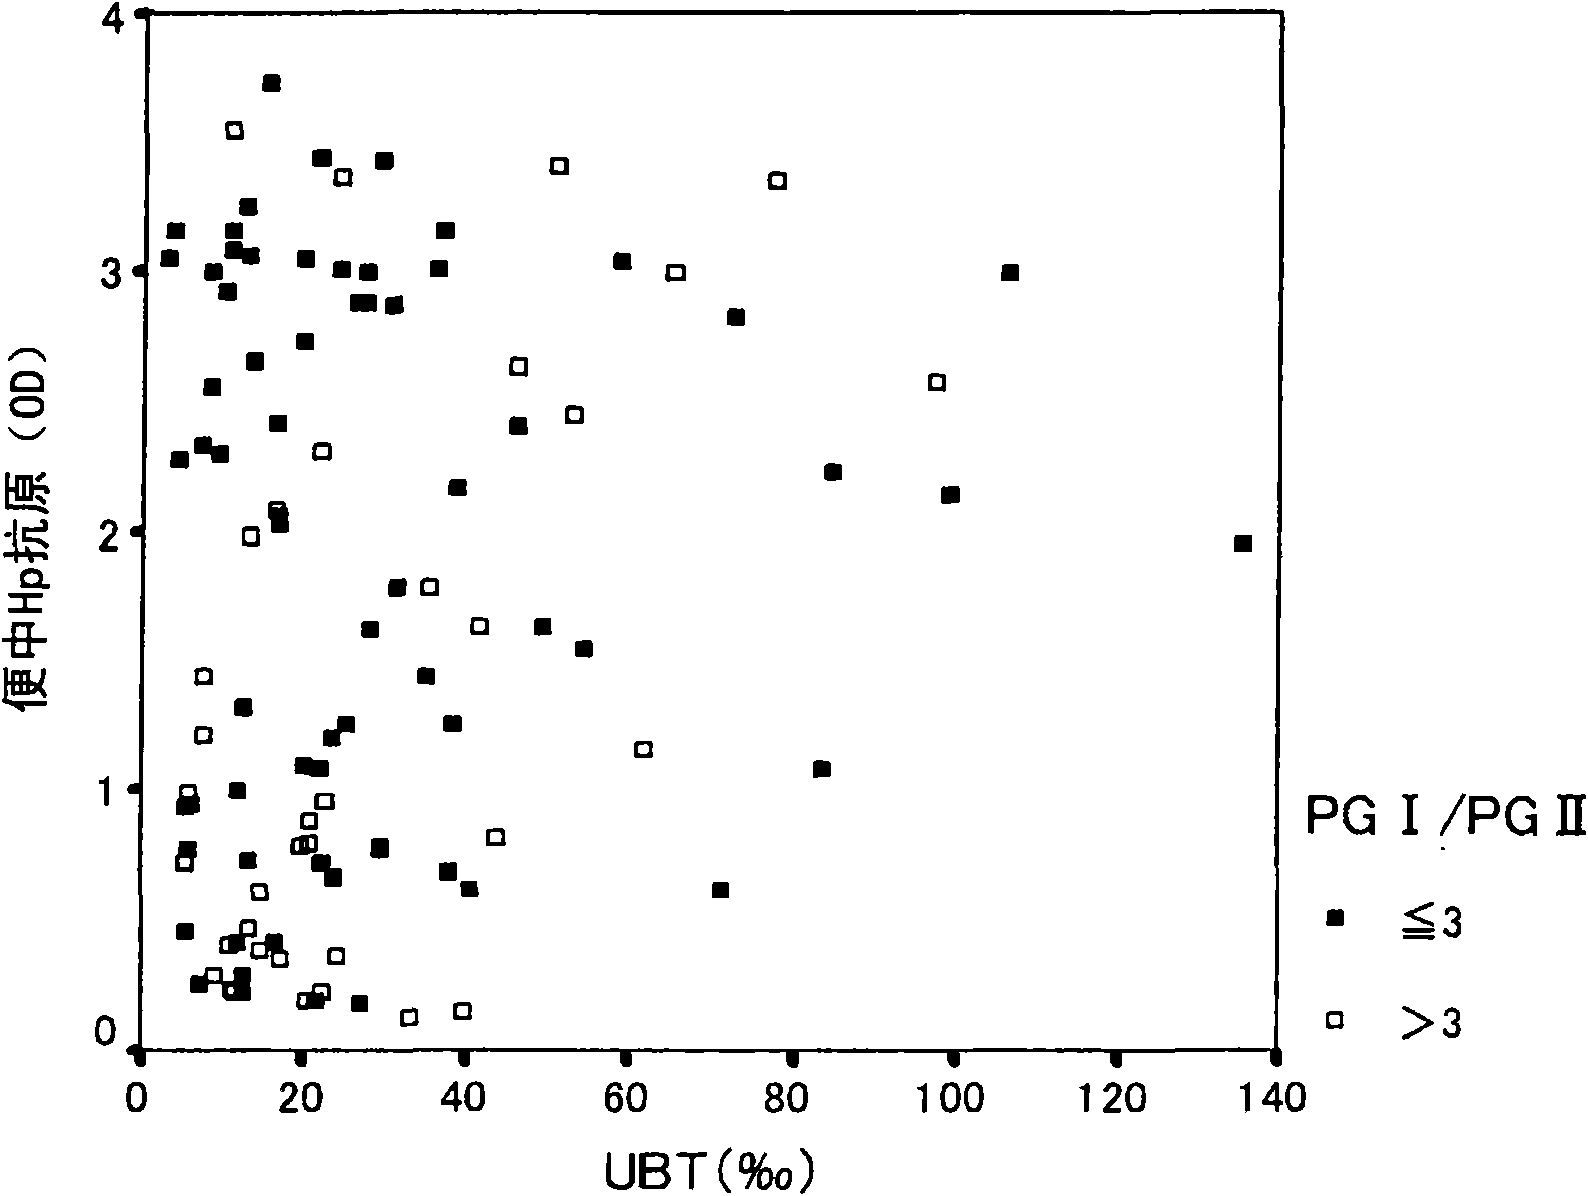 Method for evaluating gastric mucosal state by quantifying helicobacter pylori antigen in feces